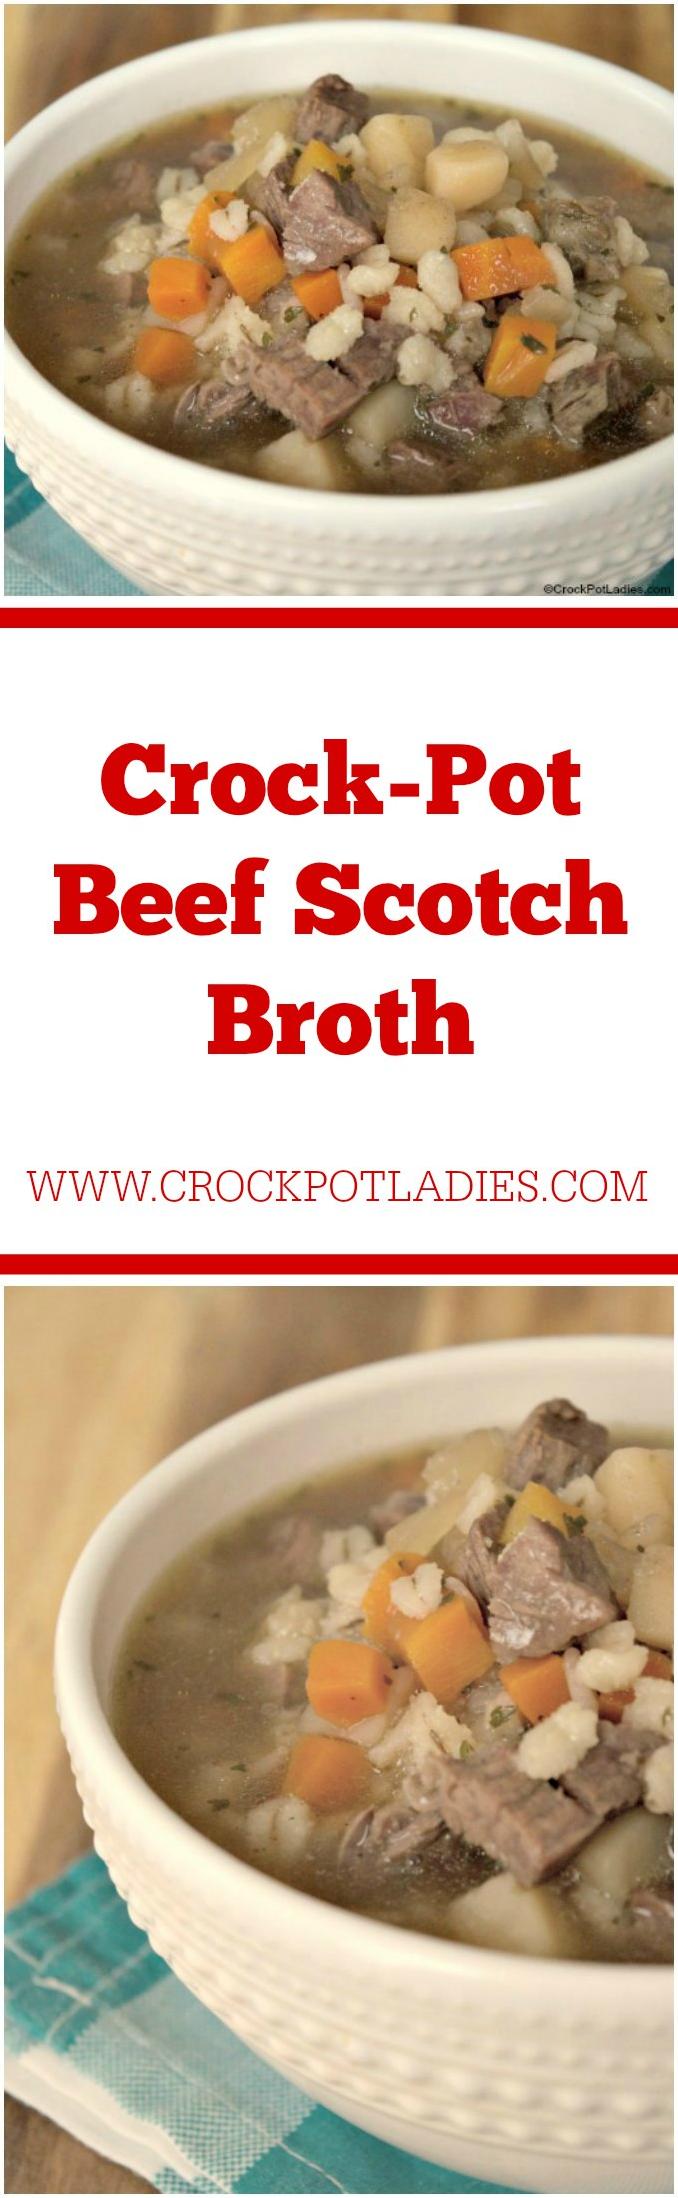  The Crock Pot does all the work for you, letting you come home to a delicious homemade soup.